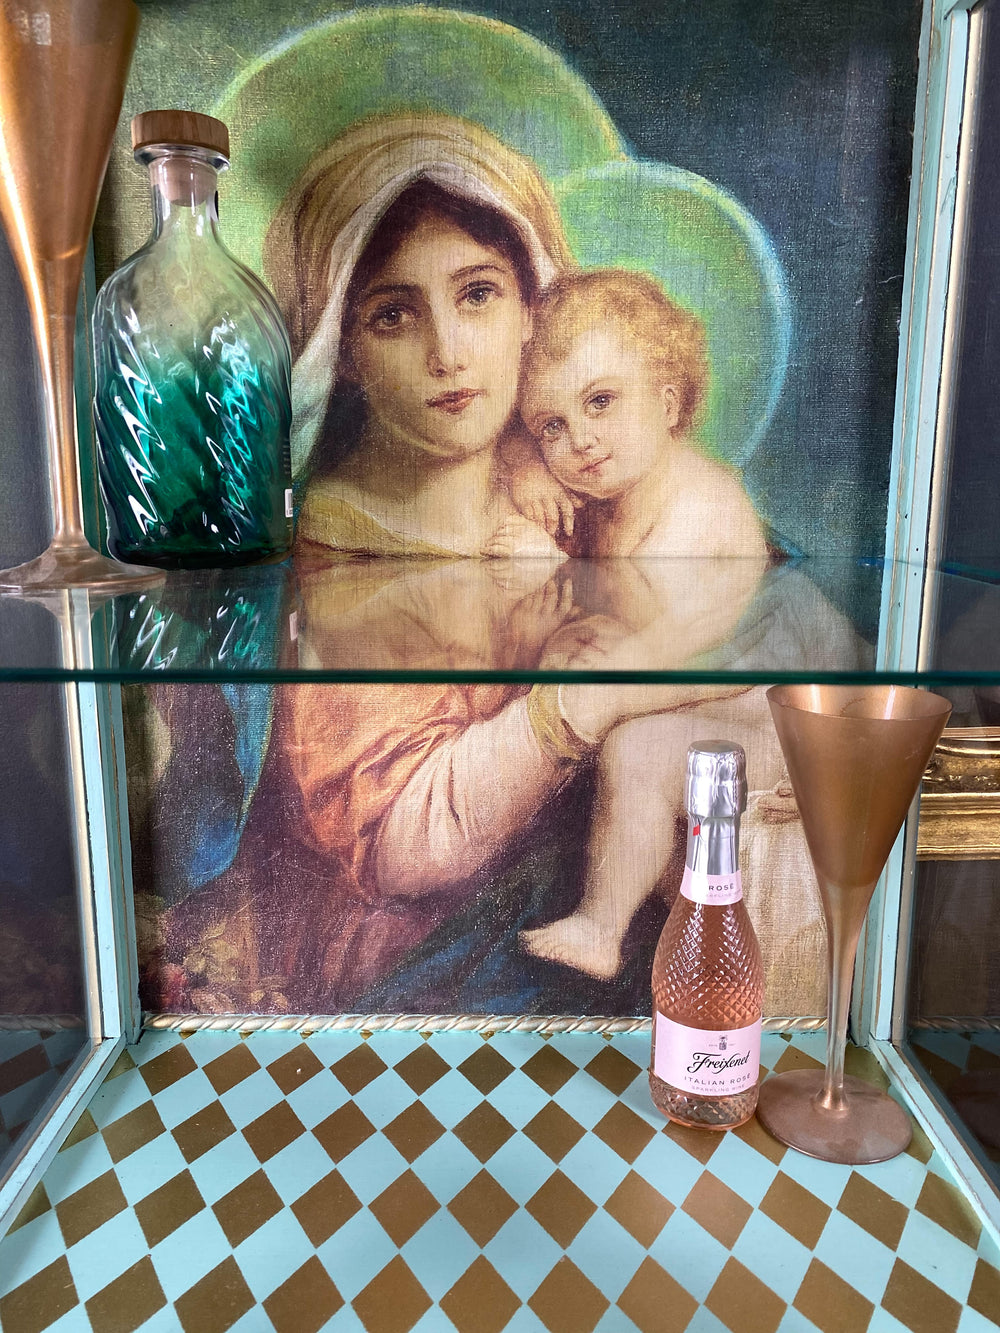 lady-griddlebone-scottish-cabinet-maker-vintage-restored-glass-drinks-cabinet-madonna-and-child-decoupage-blue-gold-finish-check-floor-small-compact